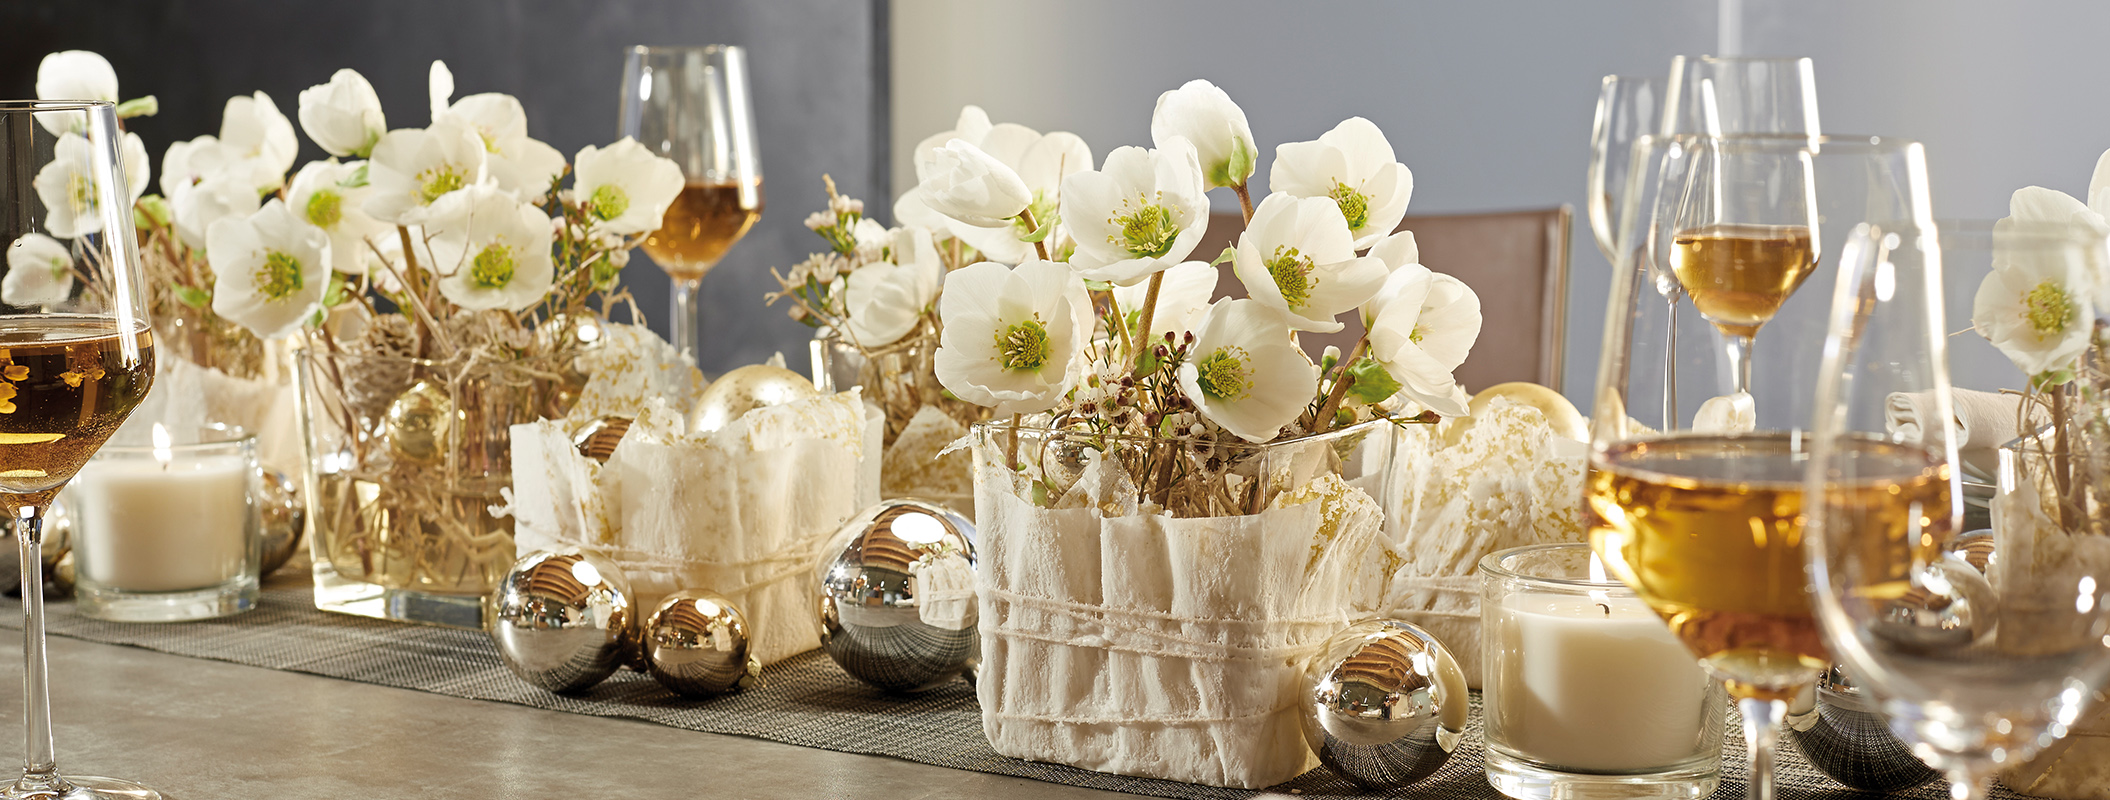 Wax vases with Christmas Rose flowers